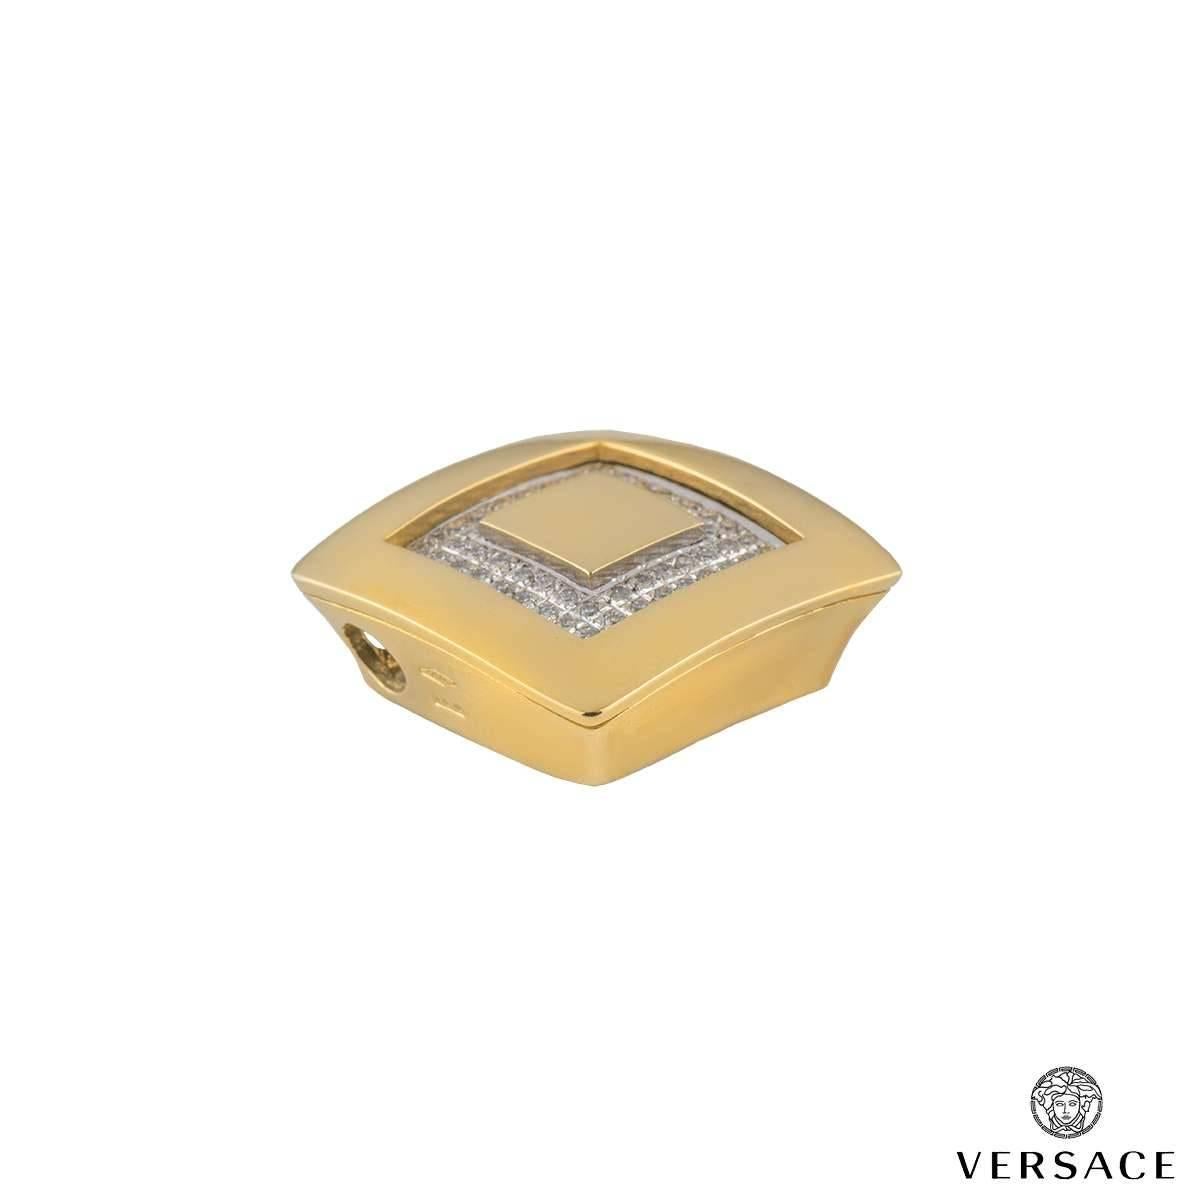 Versace Diamond and Gold Matching Pendant and Earrings Suite 1